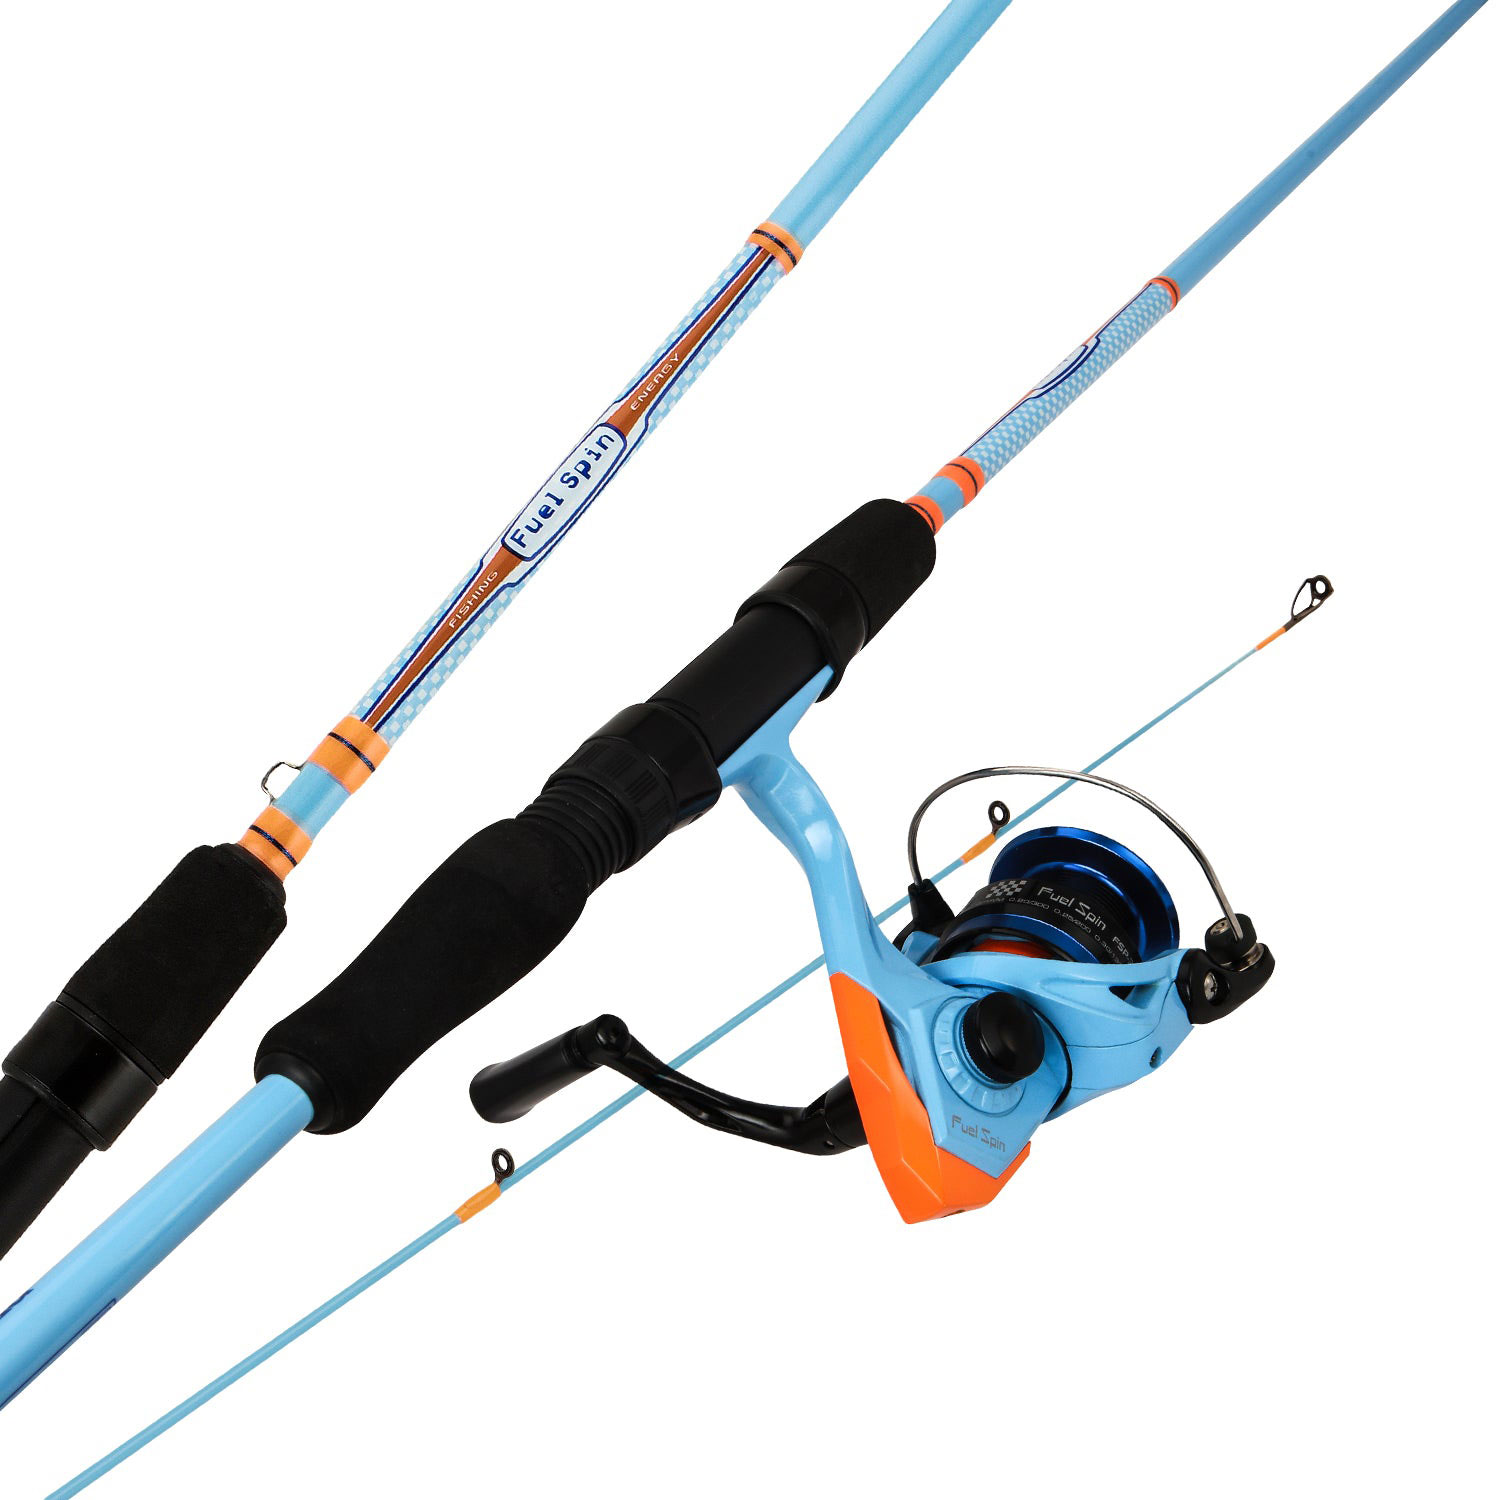 Okuma Fishing Tackle Fuel Spin Combos Spinning Rod , Up to 34% Off